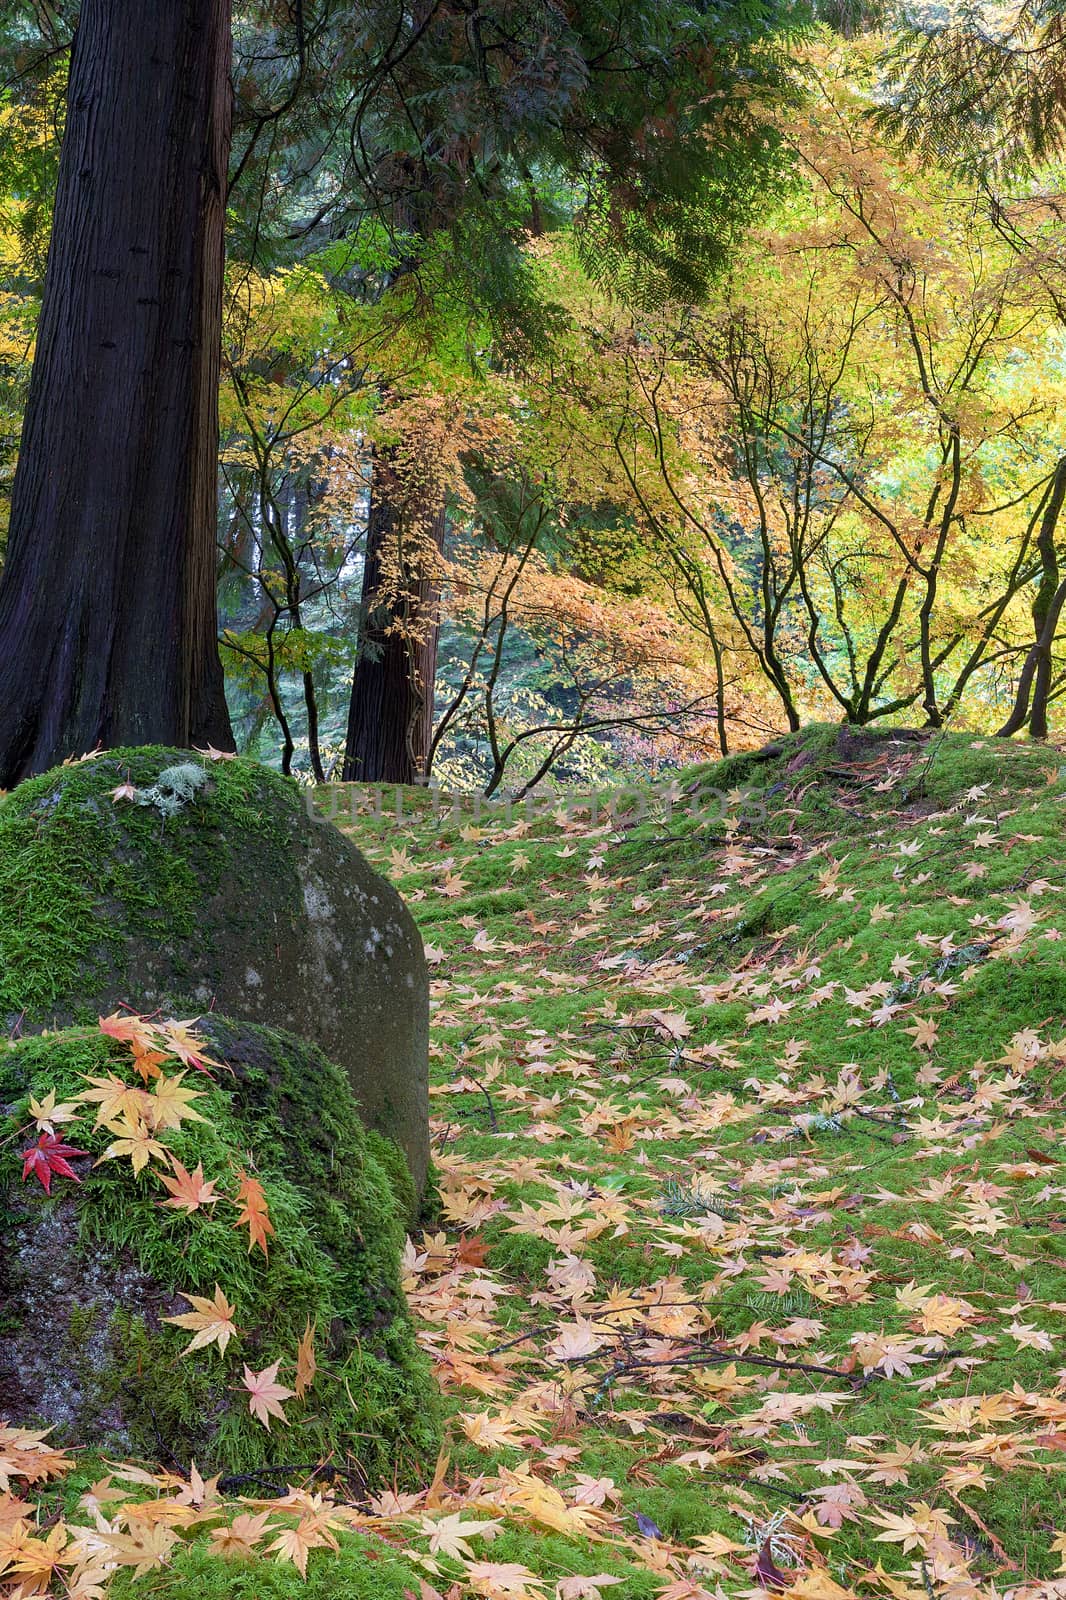 Japanese Maple Tree Leaves on Mossy Rocks and Ground in Fall Season at Portland Japanese Garden